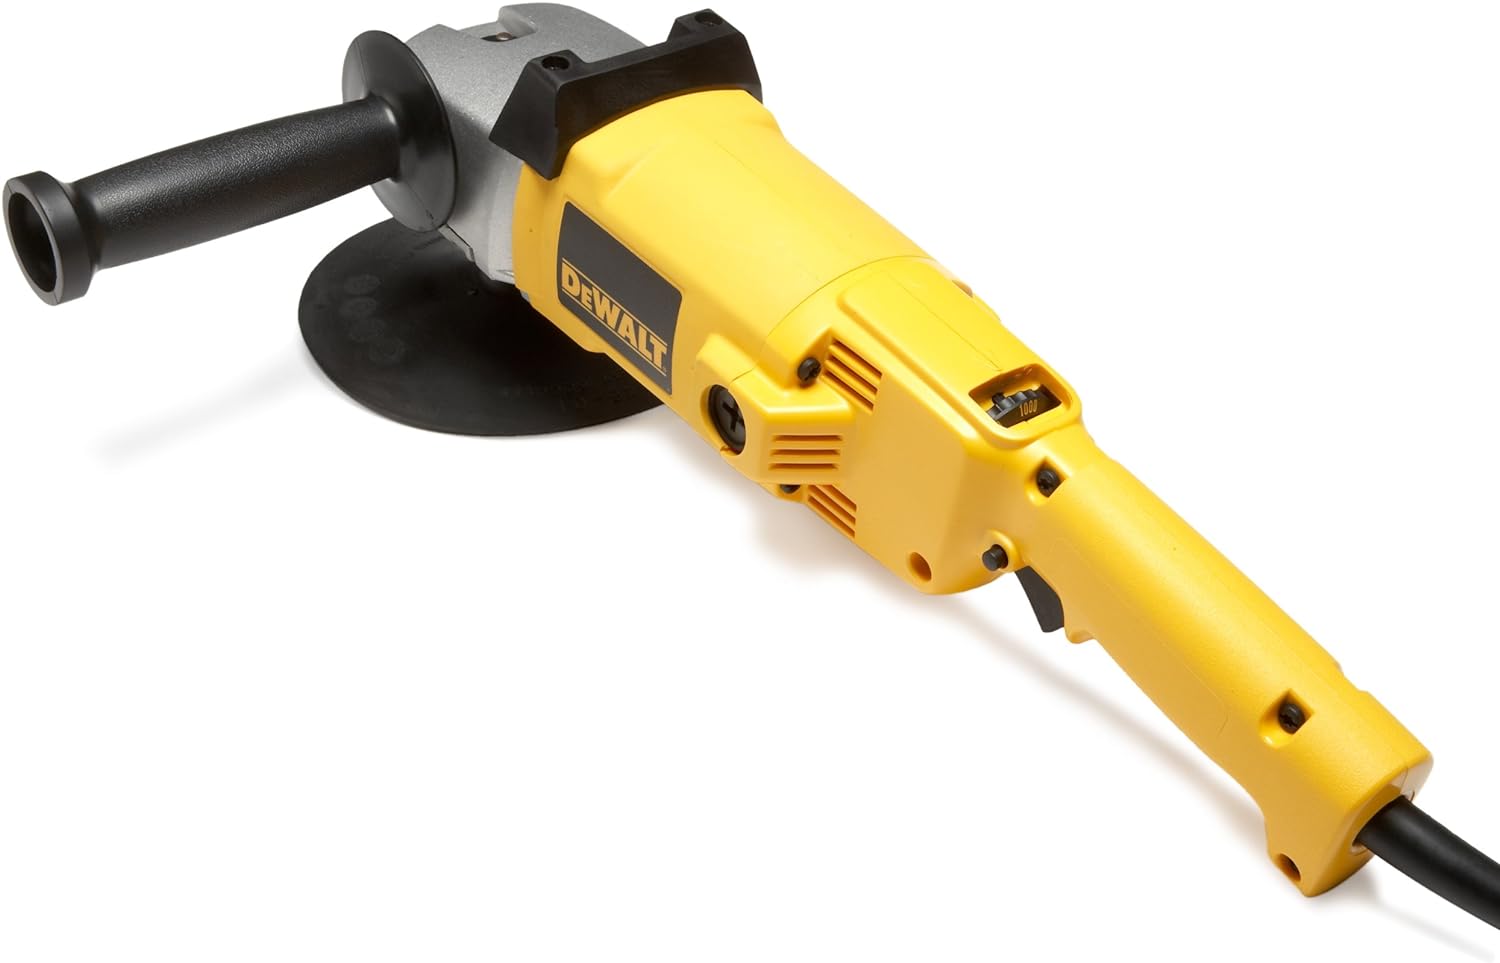 DEWALT DW849 8 Amp 7-Inch/9-Inch Electronic Variable-Speed Right-Angle Polisher